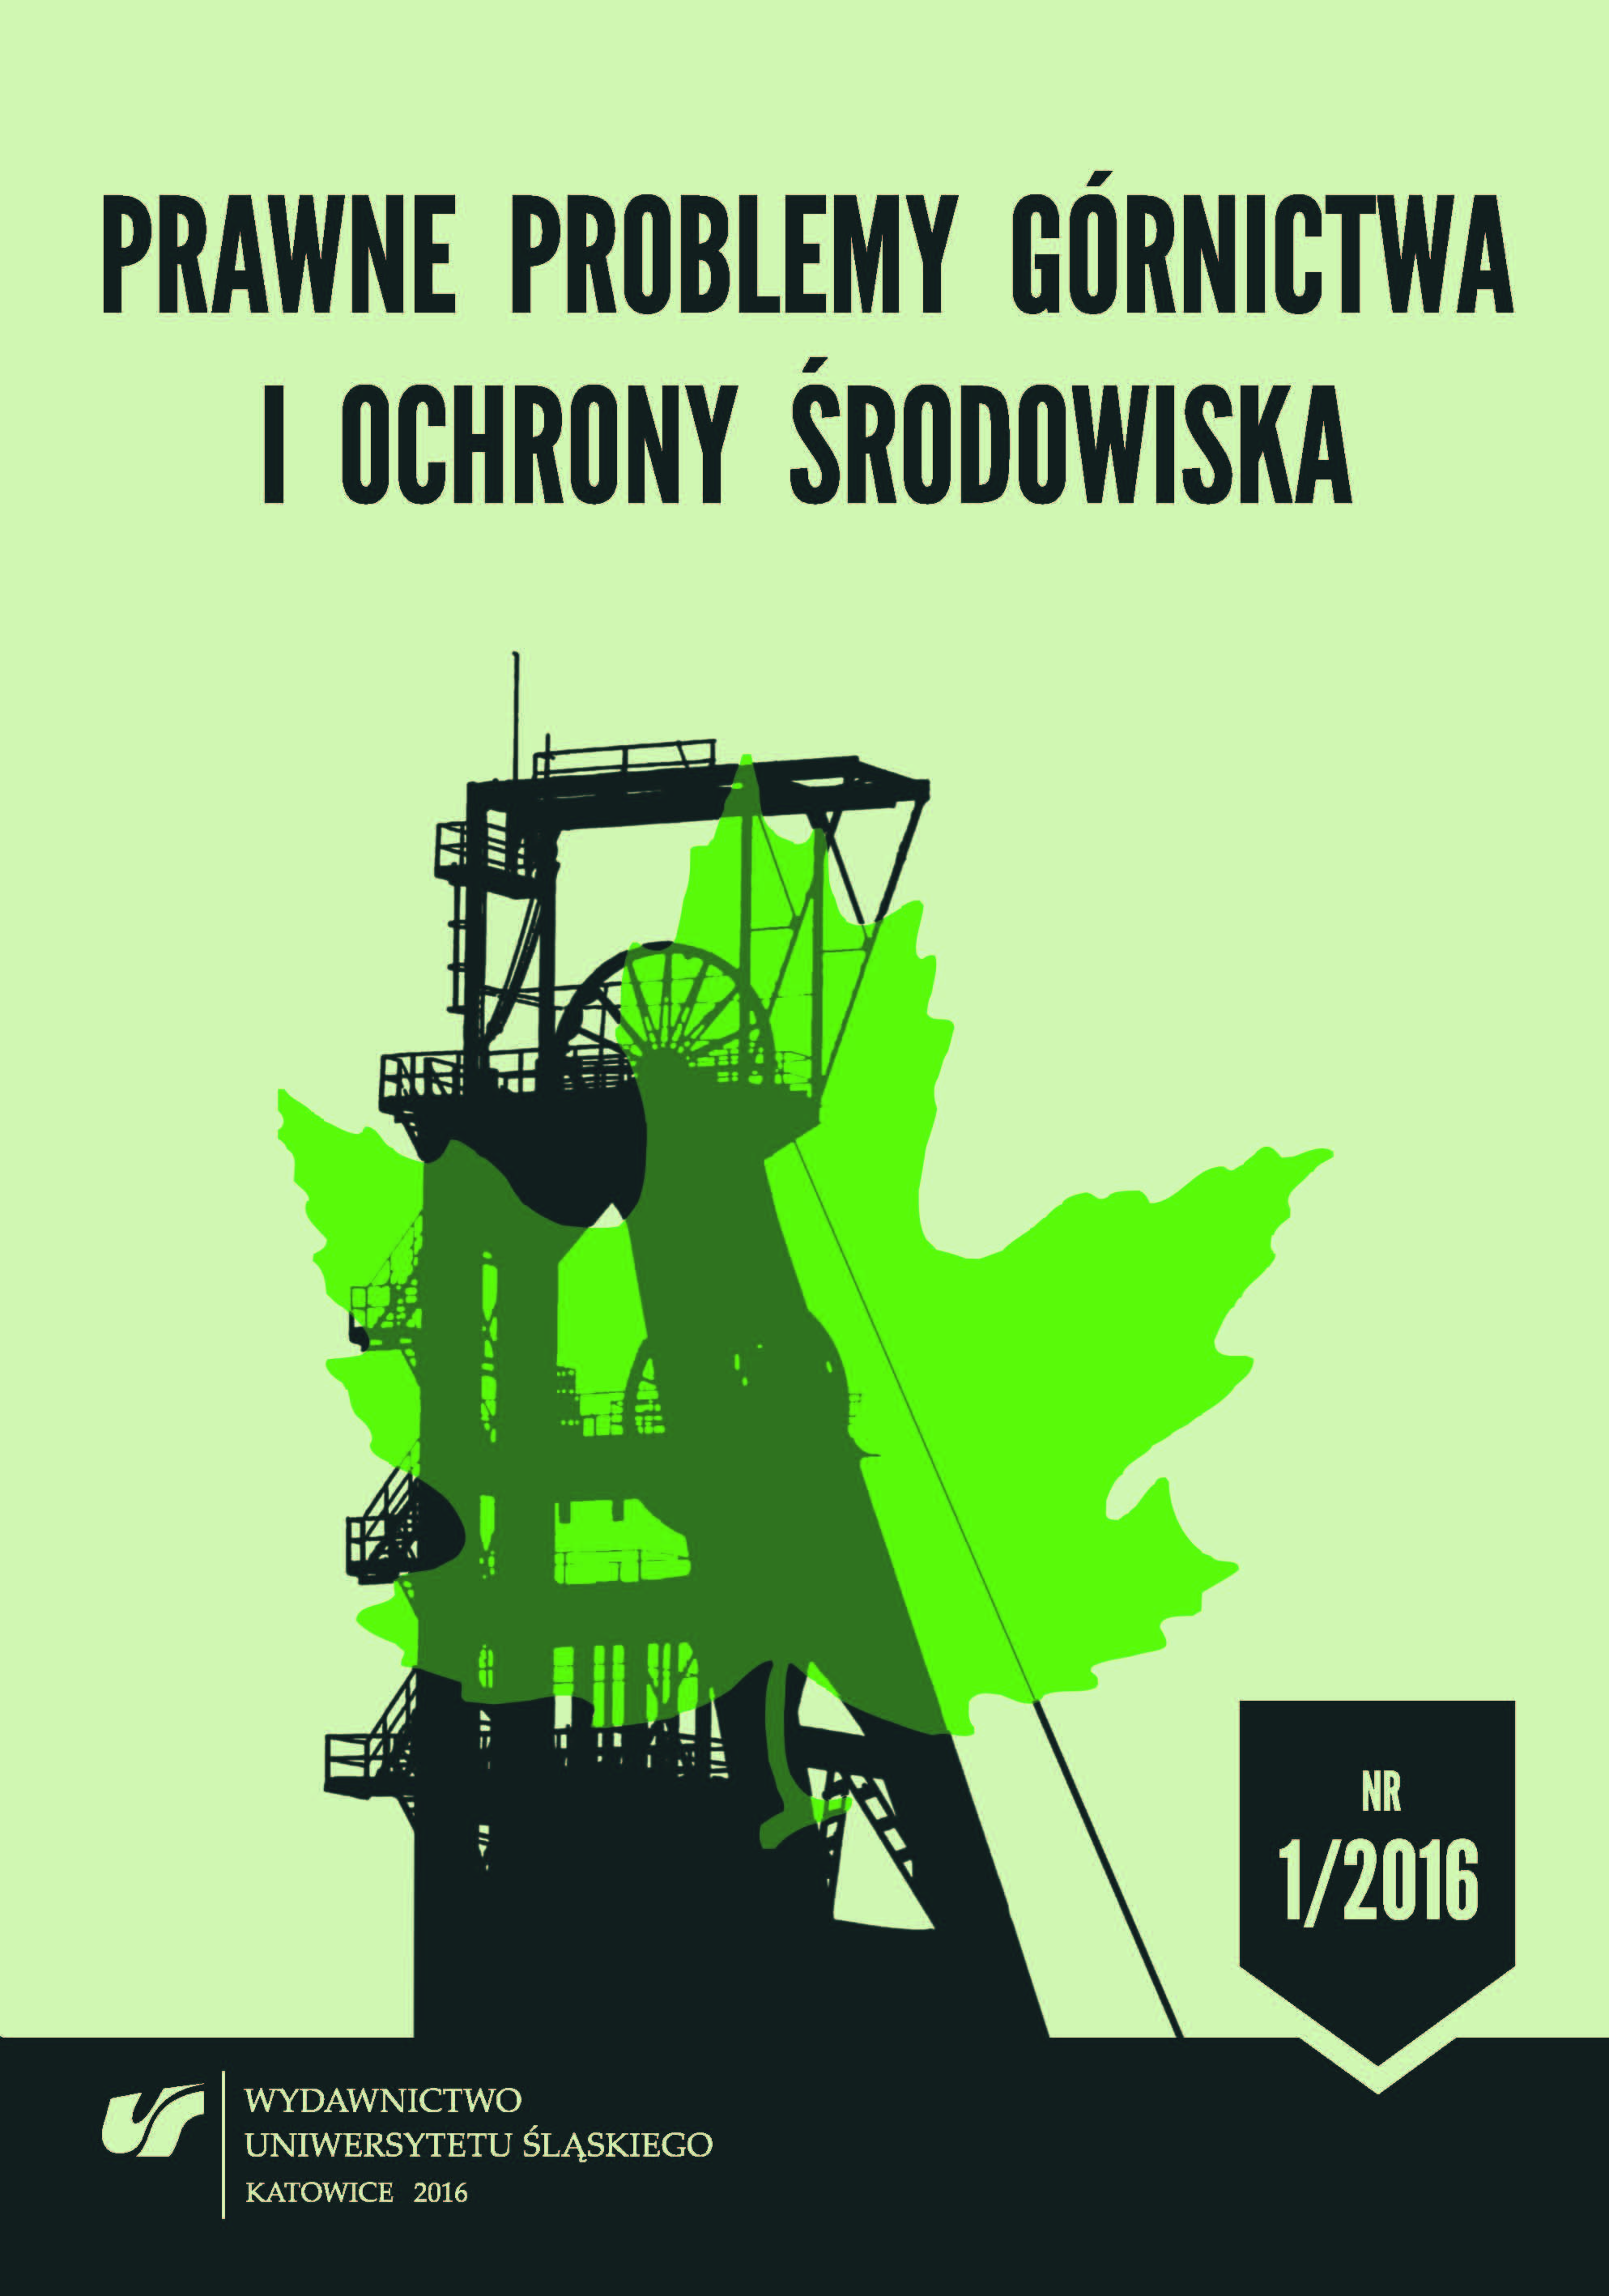 Comment on the Essay “Shale Gas in Poland. Legal and Environmental Aspects”. Ed. M. Stoczkiewicz. Warsaw: Report of ClientEarth, December 2014, 2014, pp. 99 Cover Image